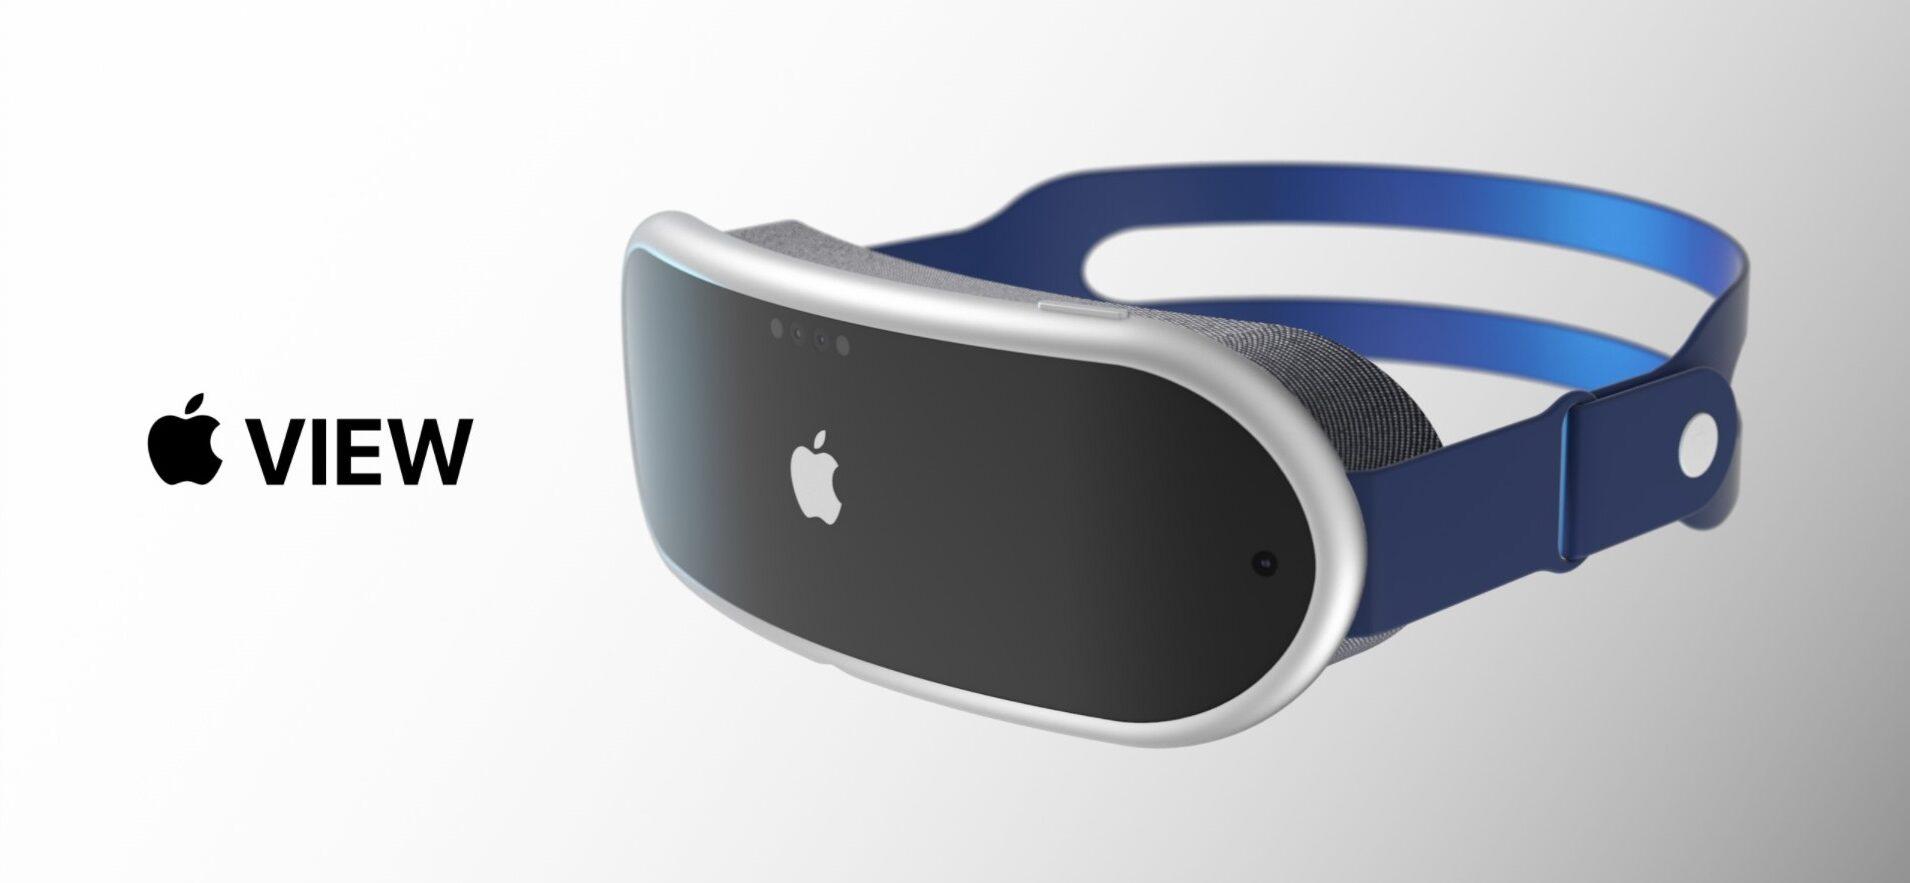 Apple VR Headset Is About To Be Revolutionary